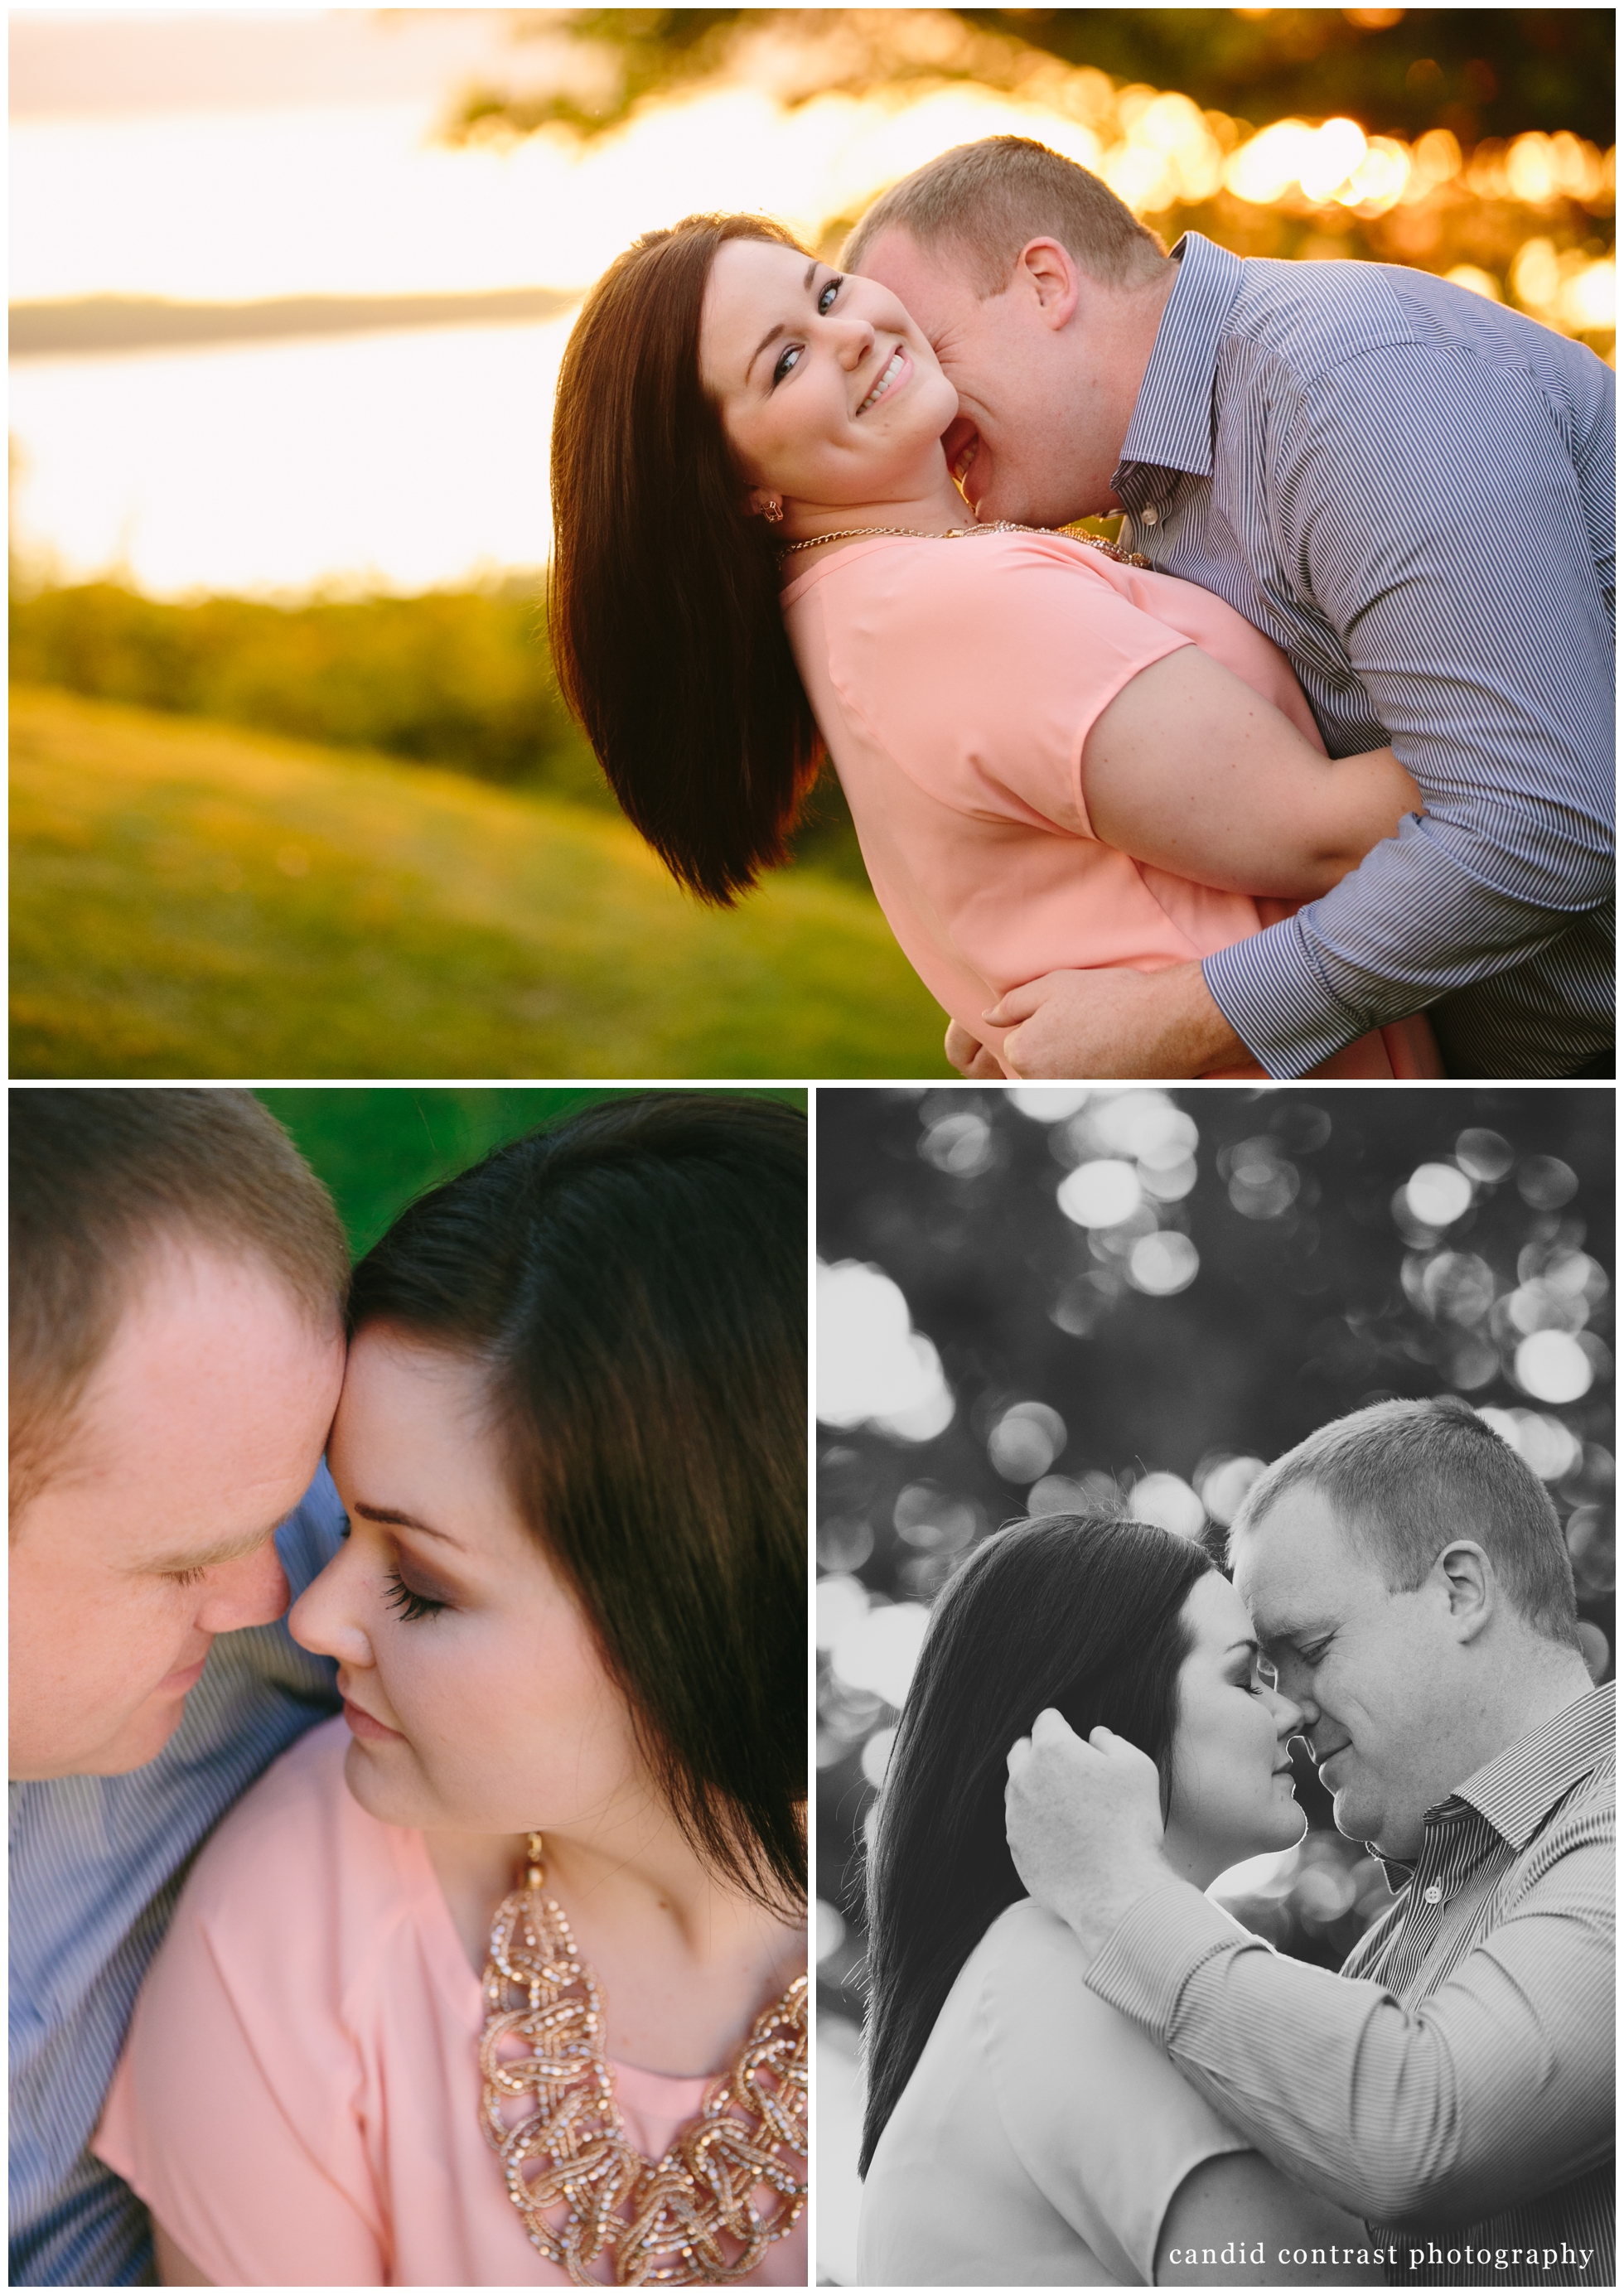 golf themed engagement session at Birchwood Golf Course in Kieler Wisconsin, Iowa wedding photographer Candid Contrast Photography